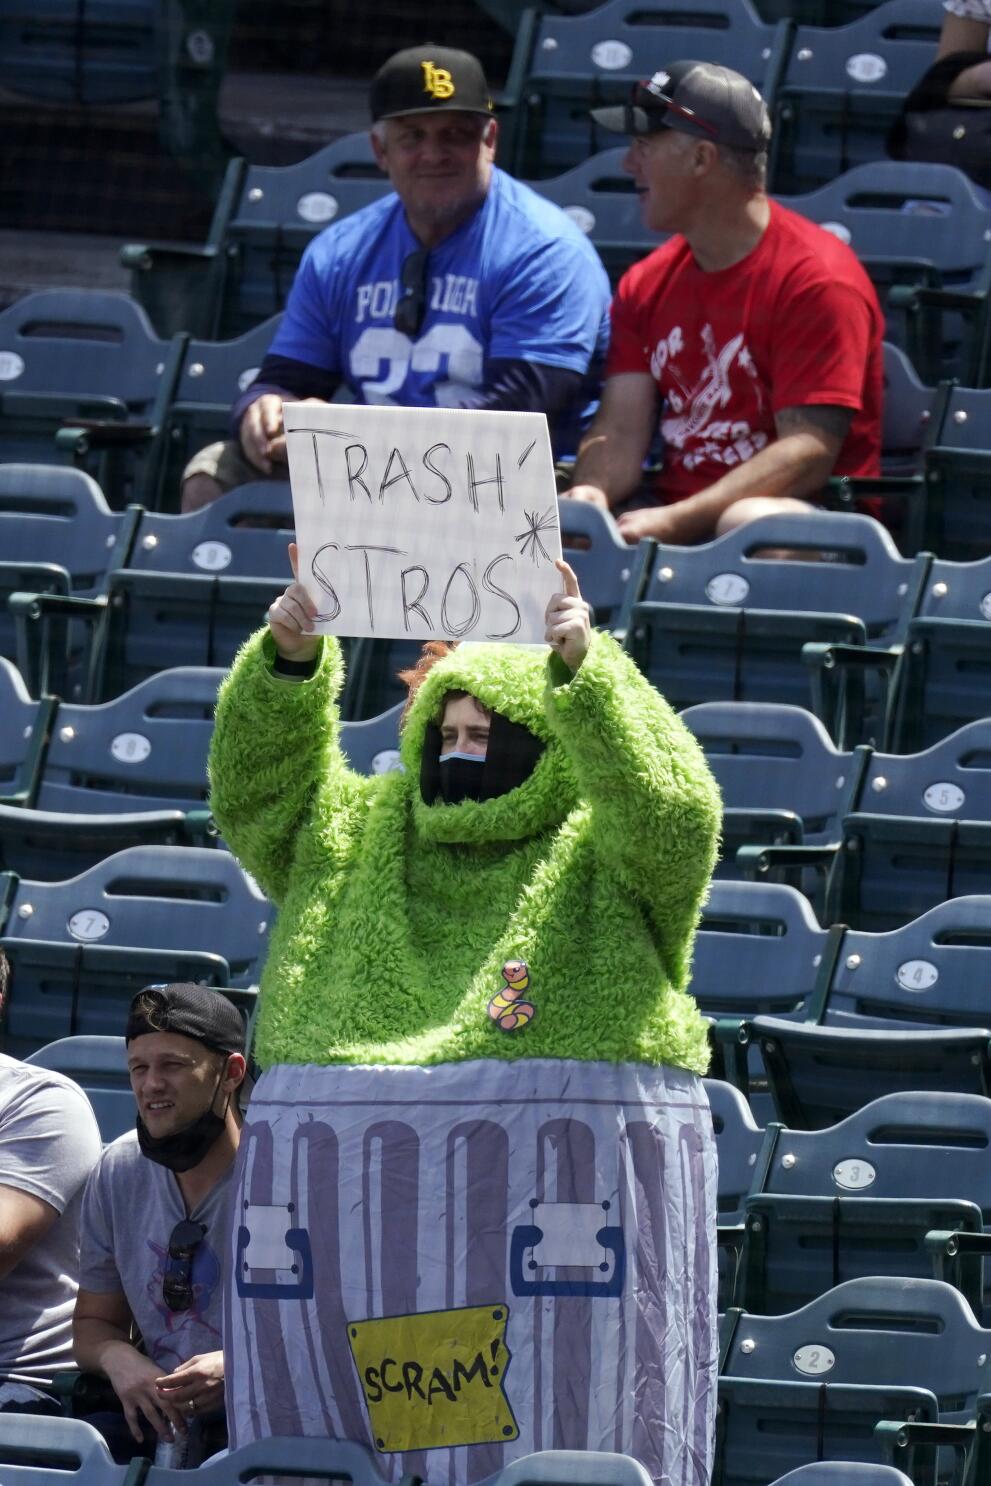 Baseballer - A fan threw an inflatable trash can onto the